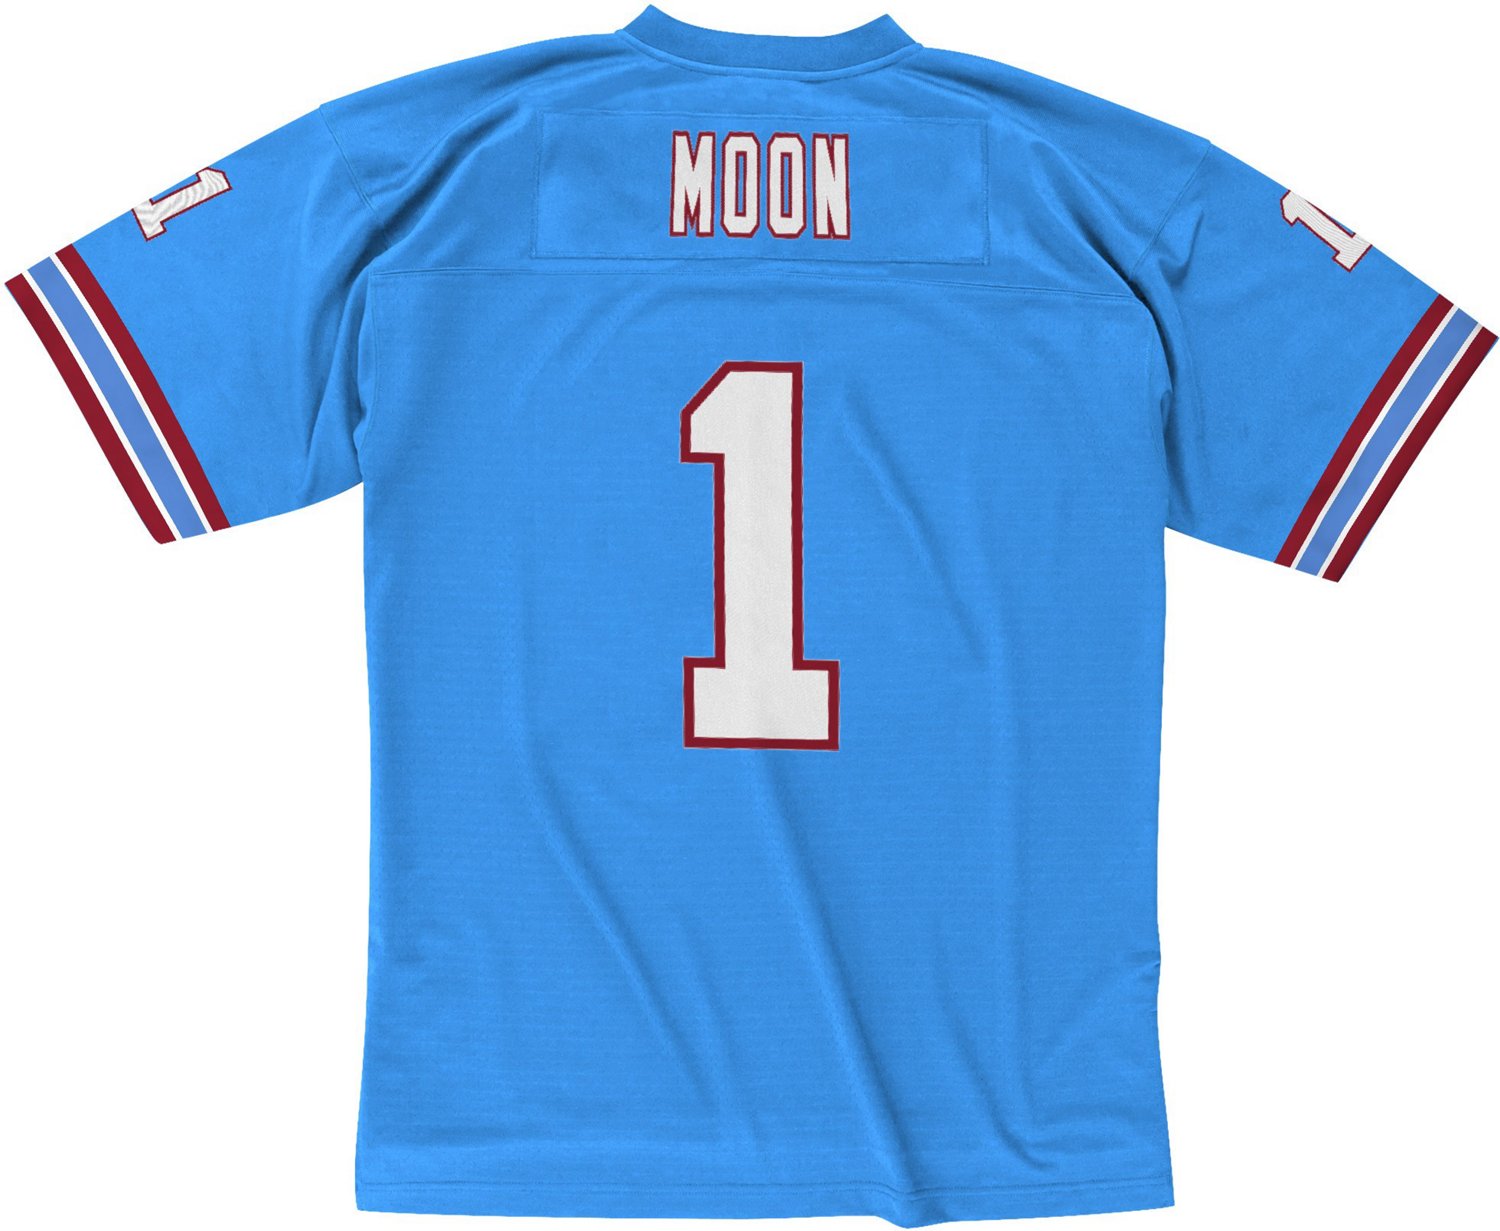 Tennessee Titans to wear Houston Oilers throwback jerseys twice